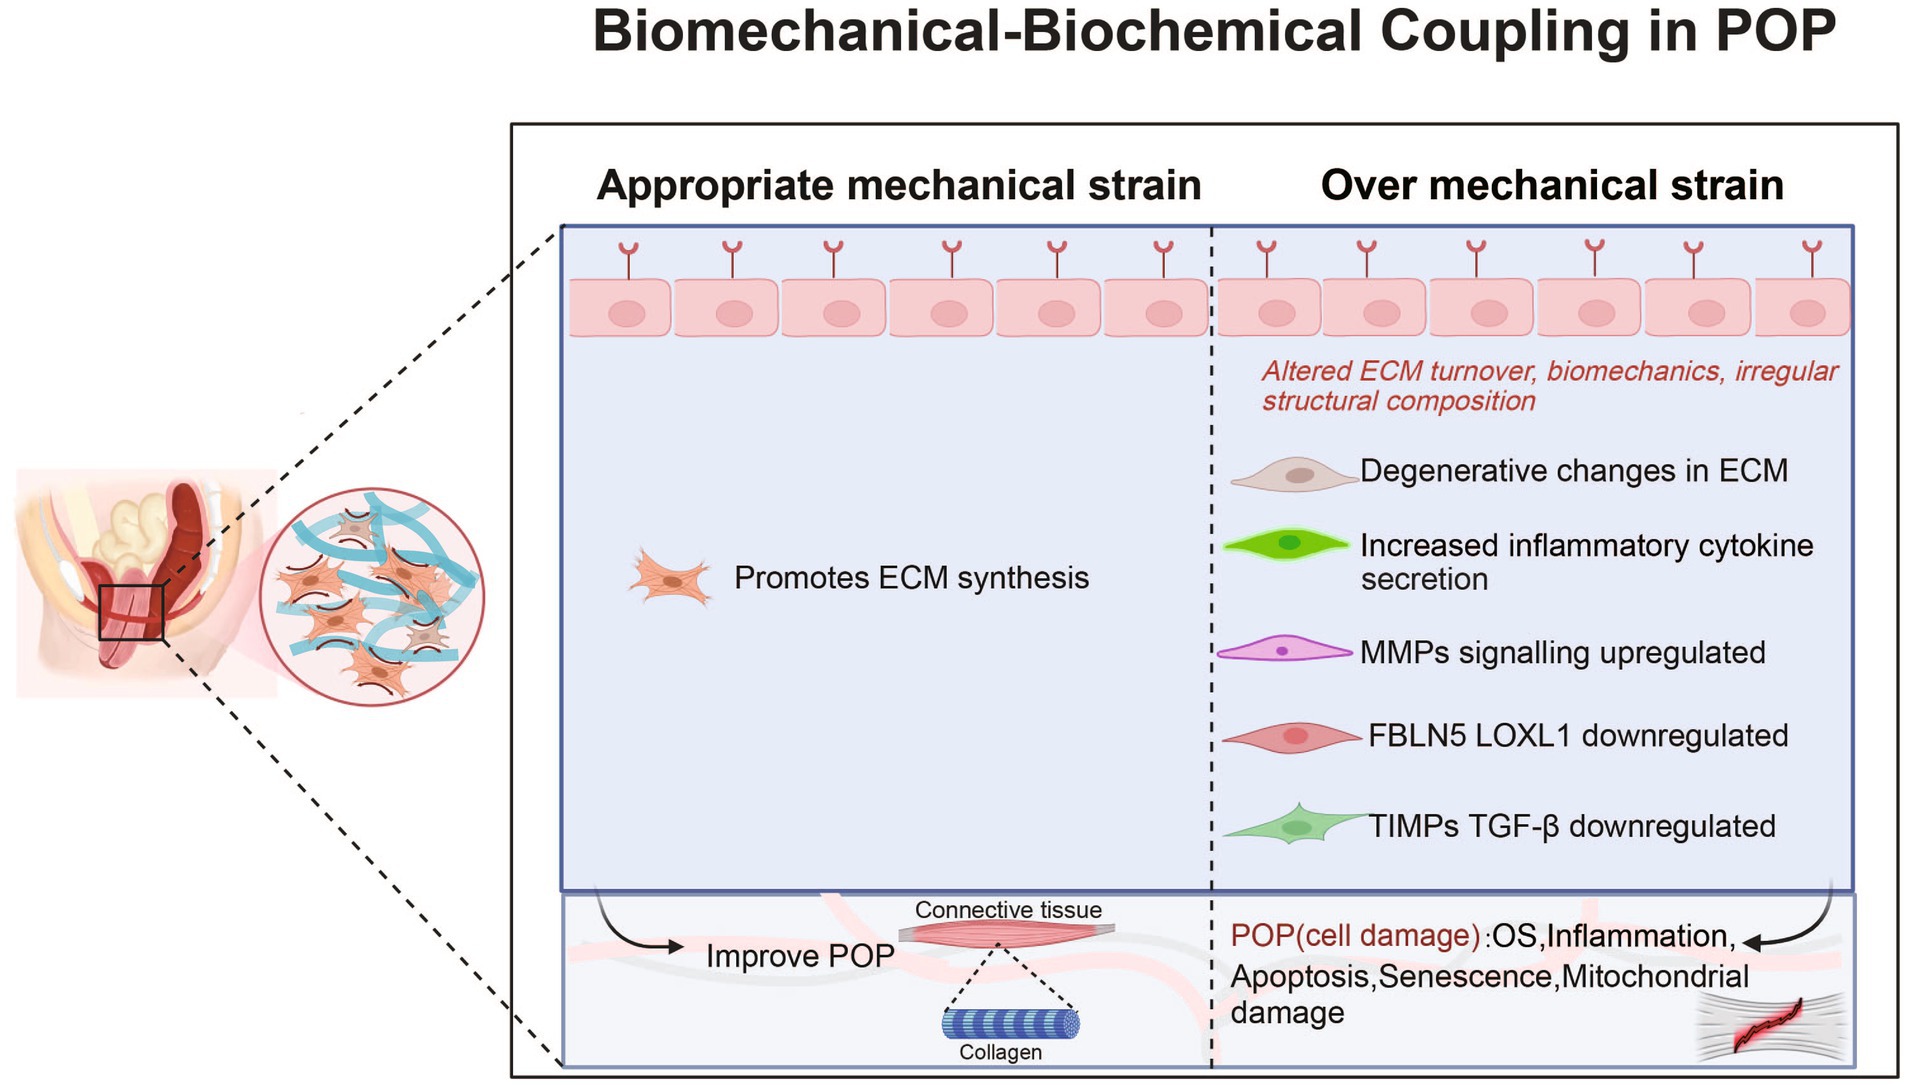 Frontiers  Roles and mechanisms of biomechanical-biochemical